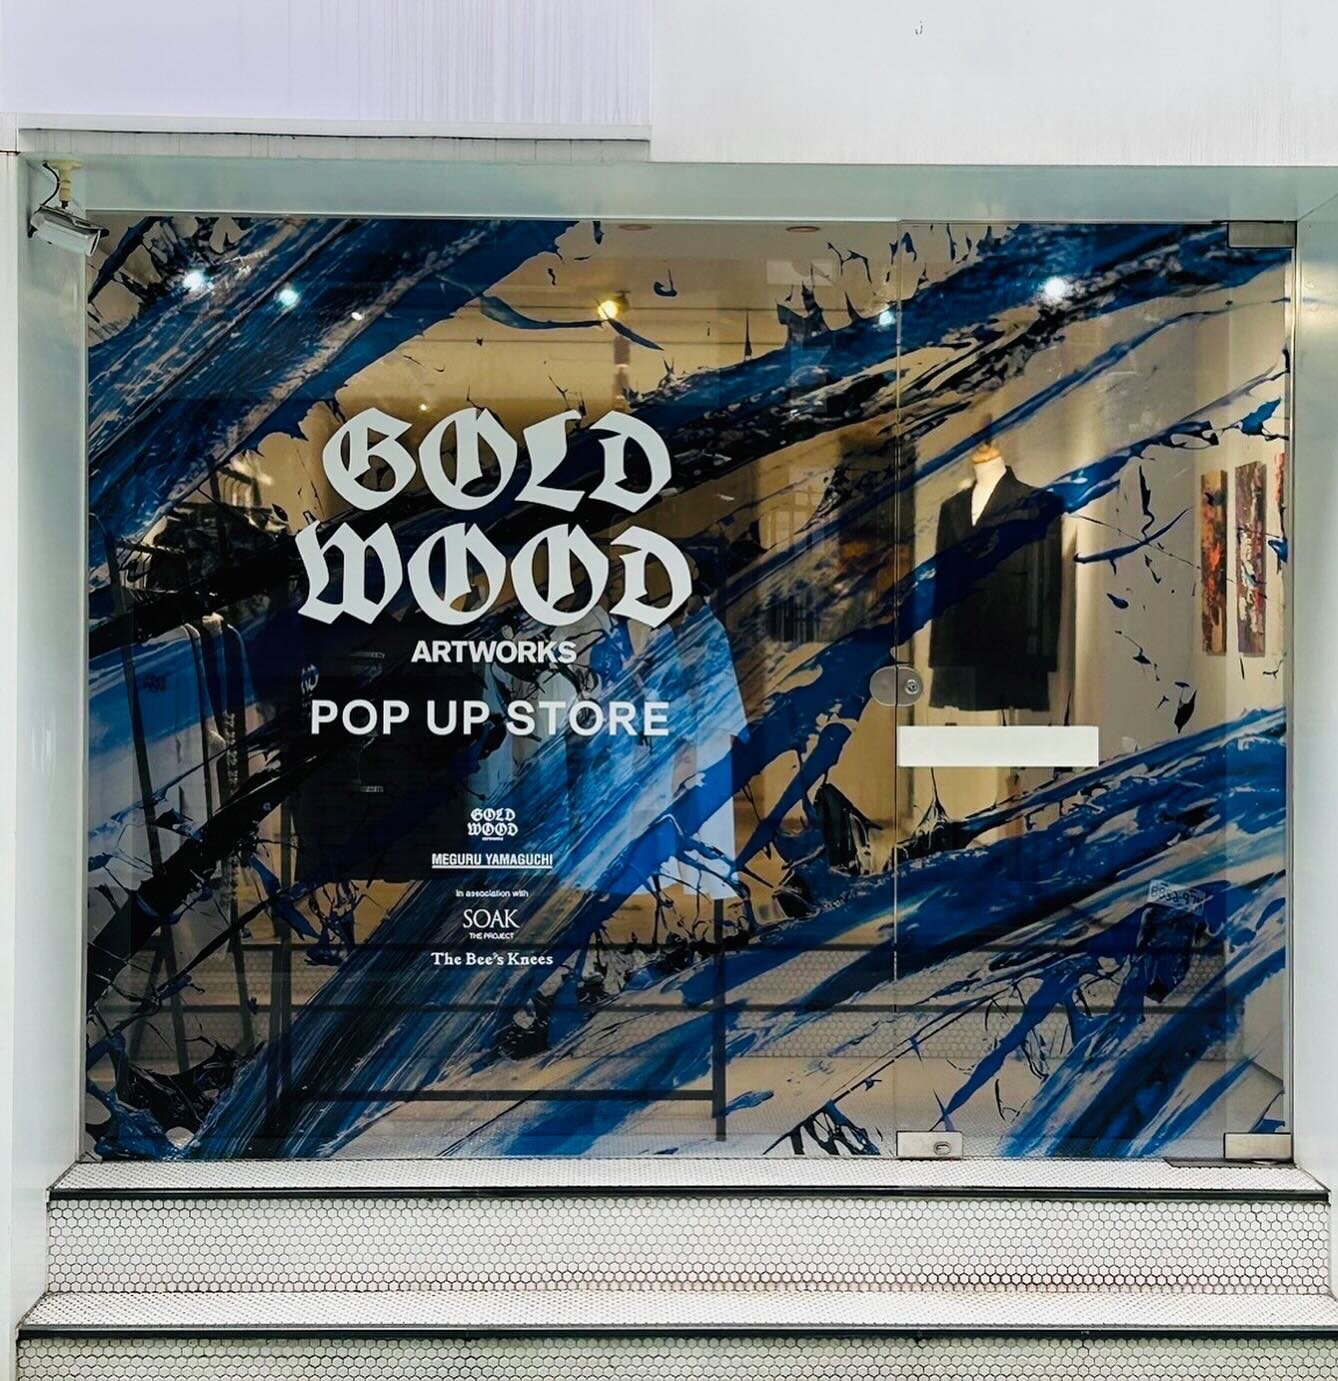 Artist @meguruyamaguchi &lsquo;s studio @goldwoodartworks is teaming up with @soak_theproject launching a POP-UP store with exclusive apparel items and various goods on site. 
Date: March 9th, 2024
Hours: 13:00-18:00
Address: No. 29, Lane 219, Sectio